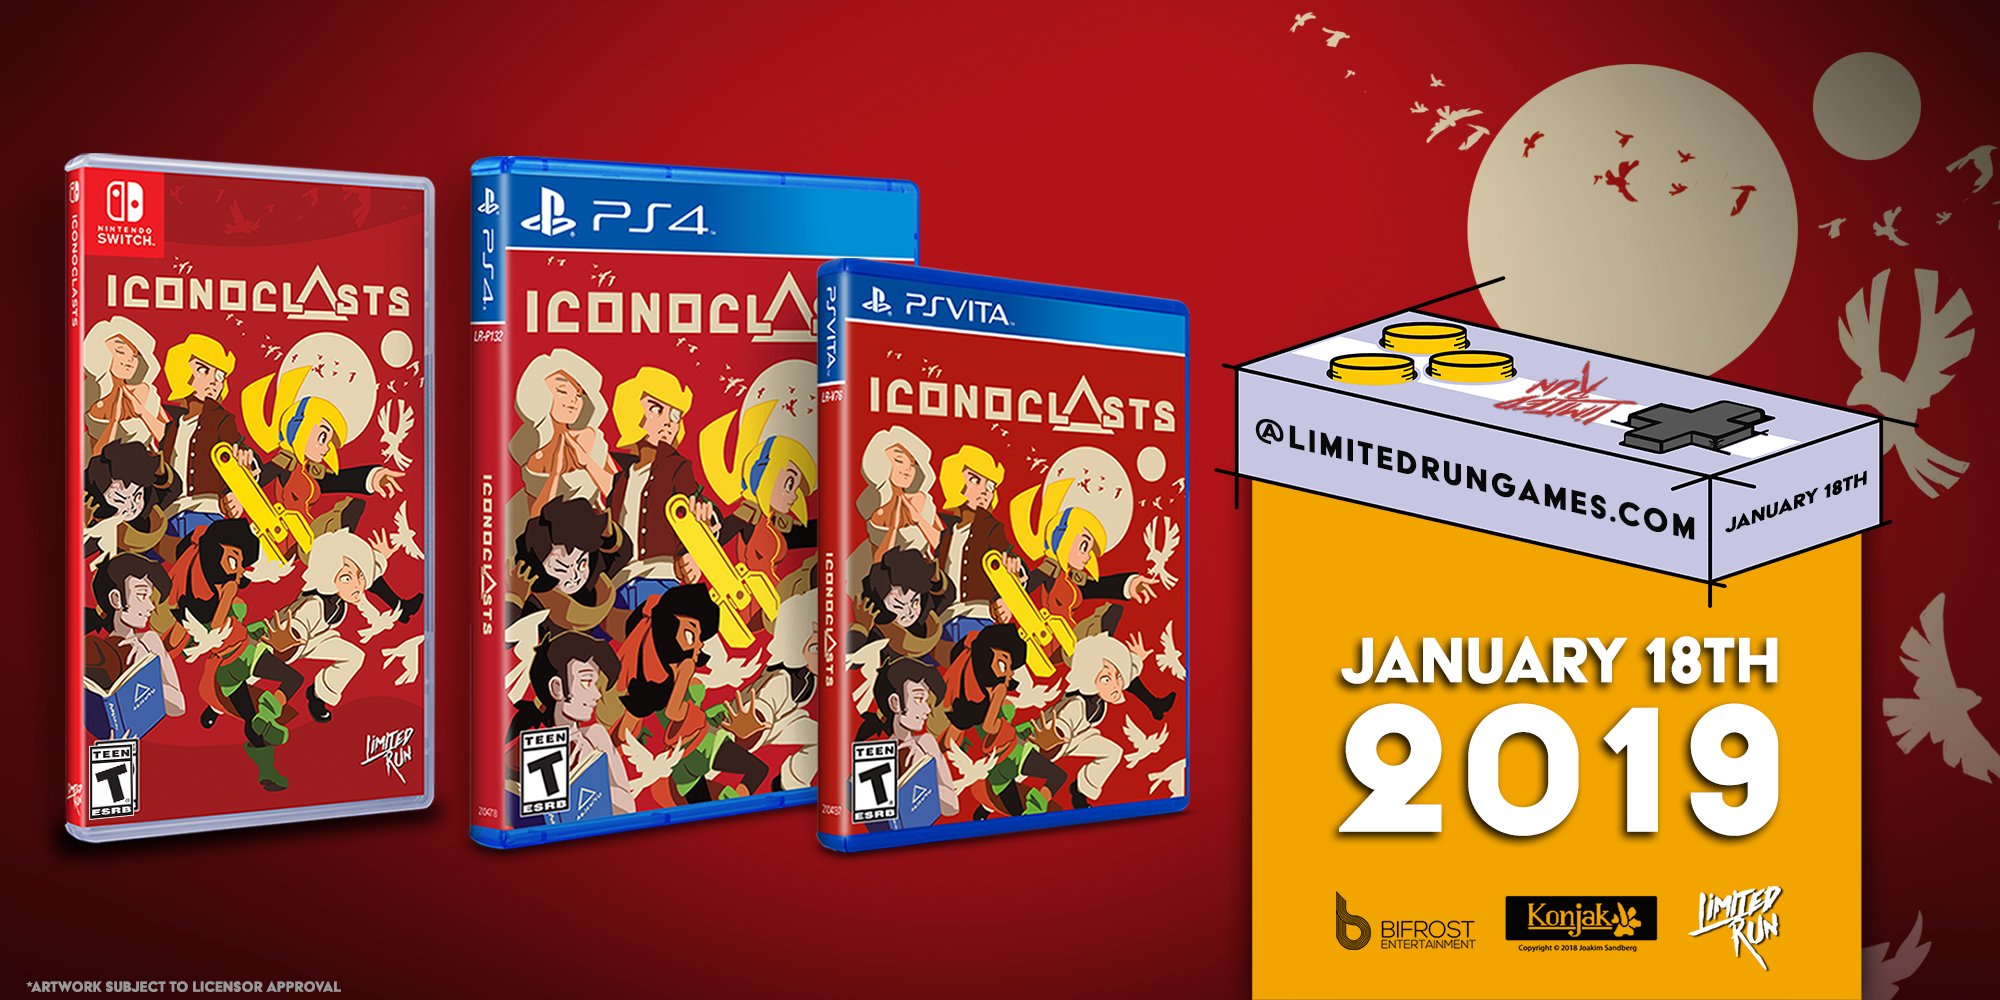 Iconoclasts-Limited-Run-Games_12-27-18.jpg